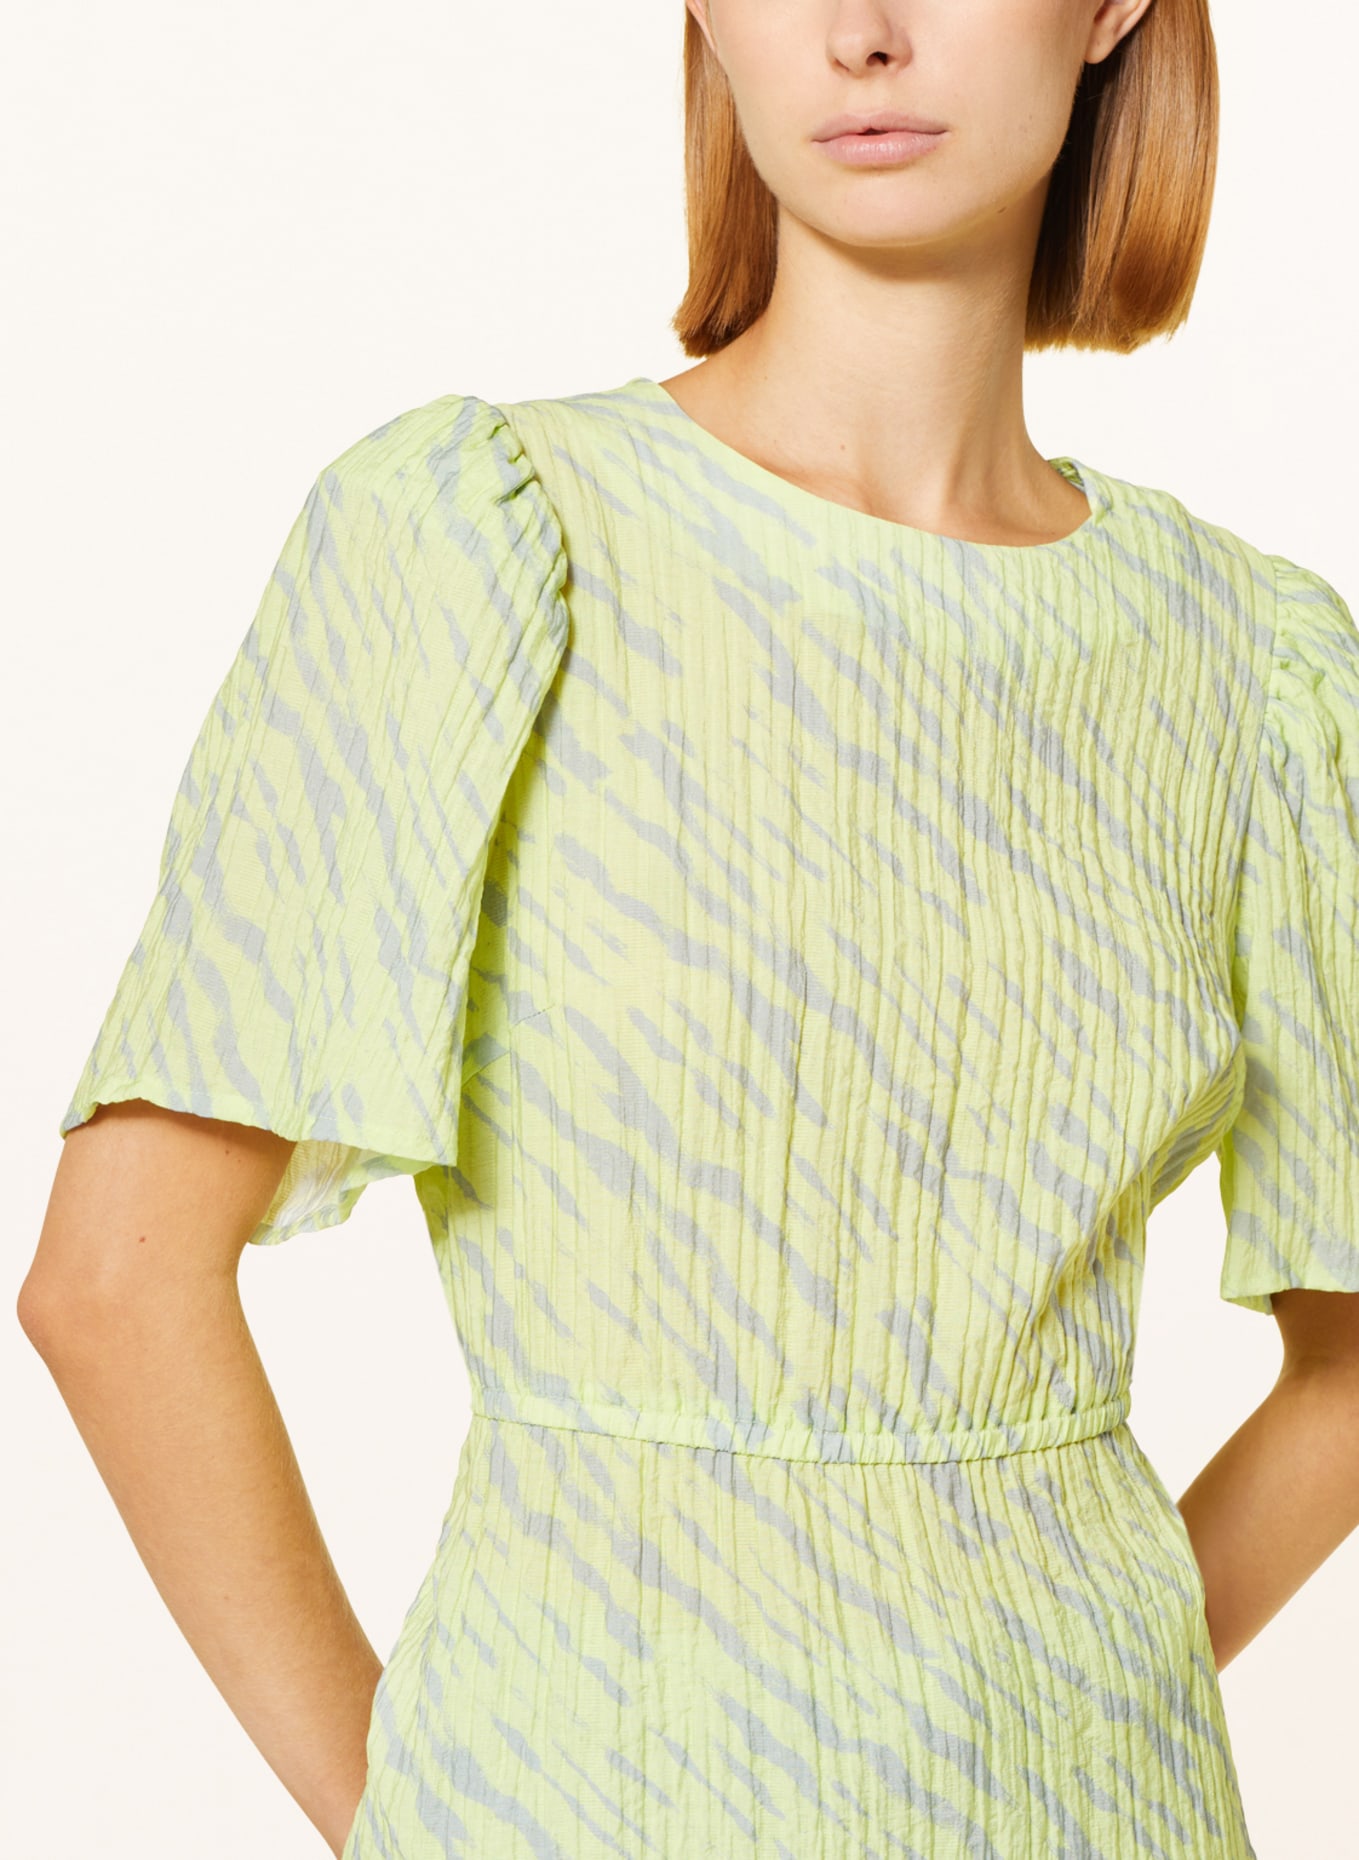 BEAUMONT Shirt blouse ISLA with cut-out, Color: LIGHT GREEN/ BLUE GRAY (Image 4)